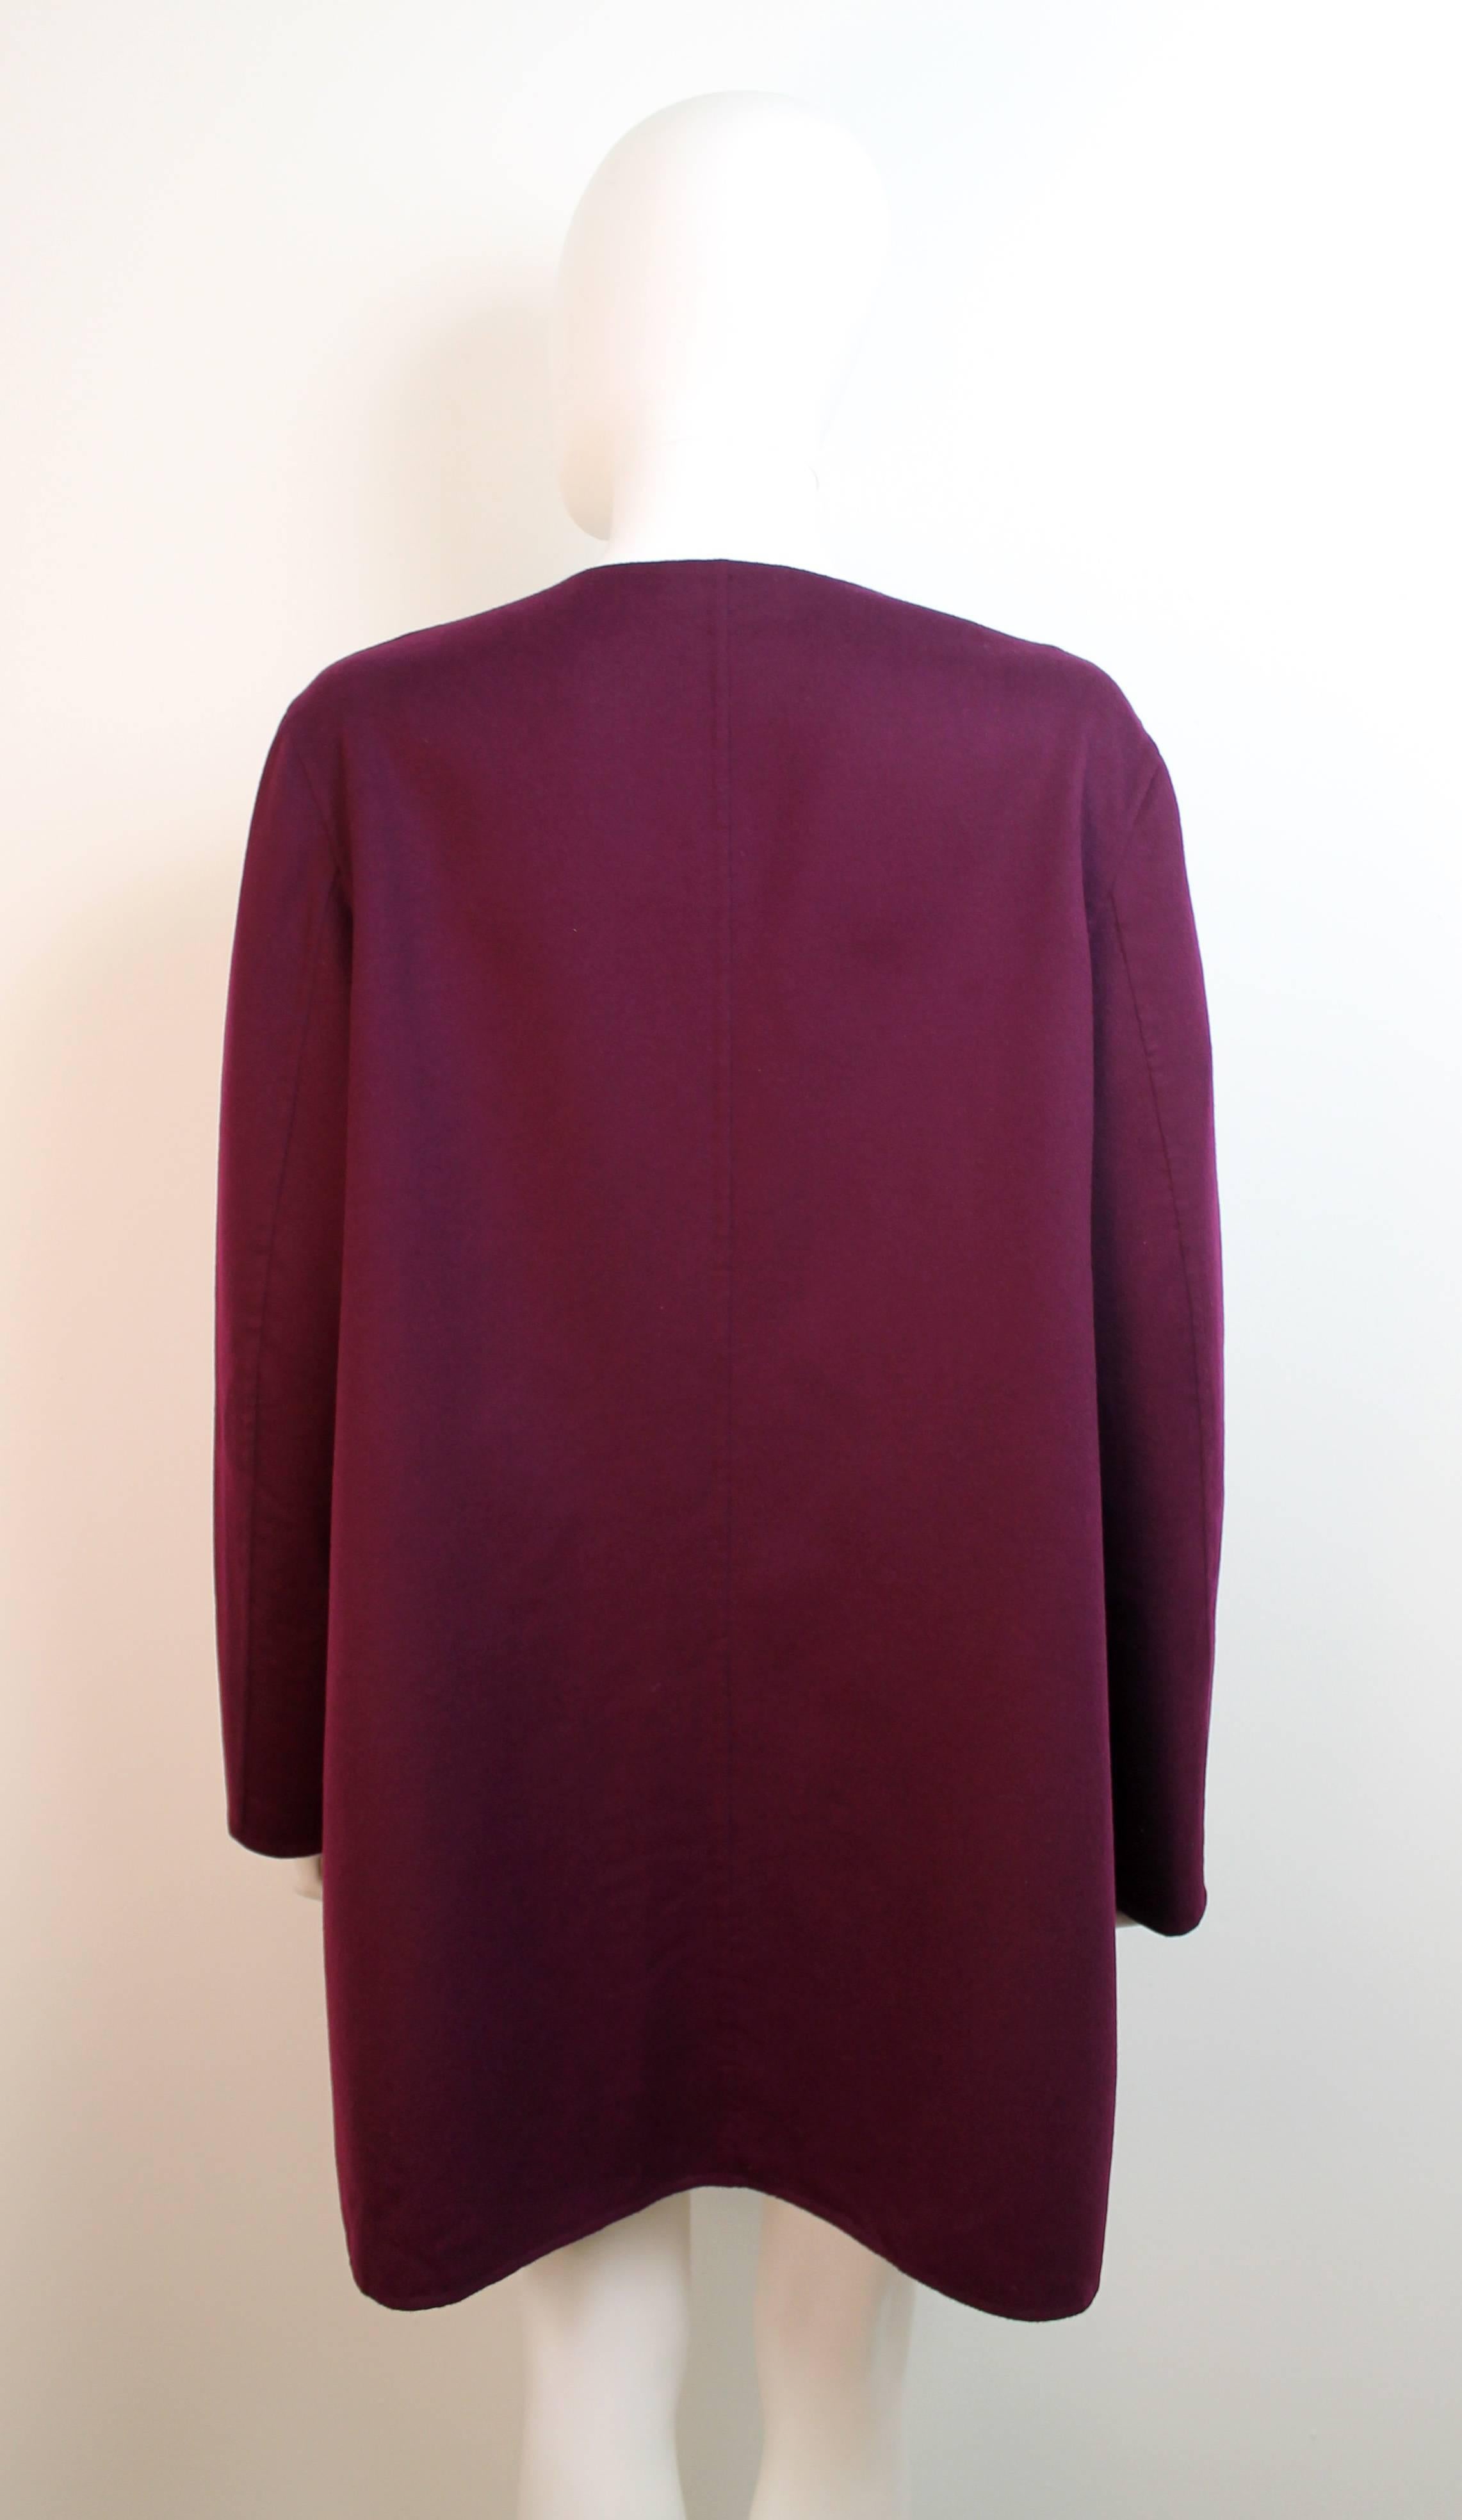 Beautiful purple coat by Jil Sander. The coat is extremely soft and features a round collar and no closures,